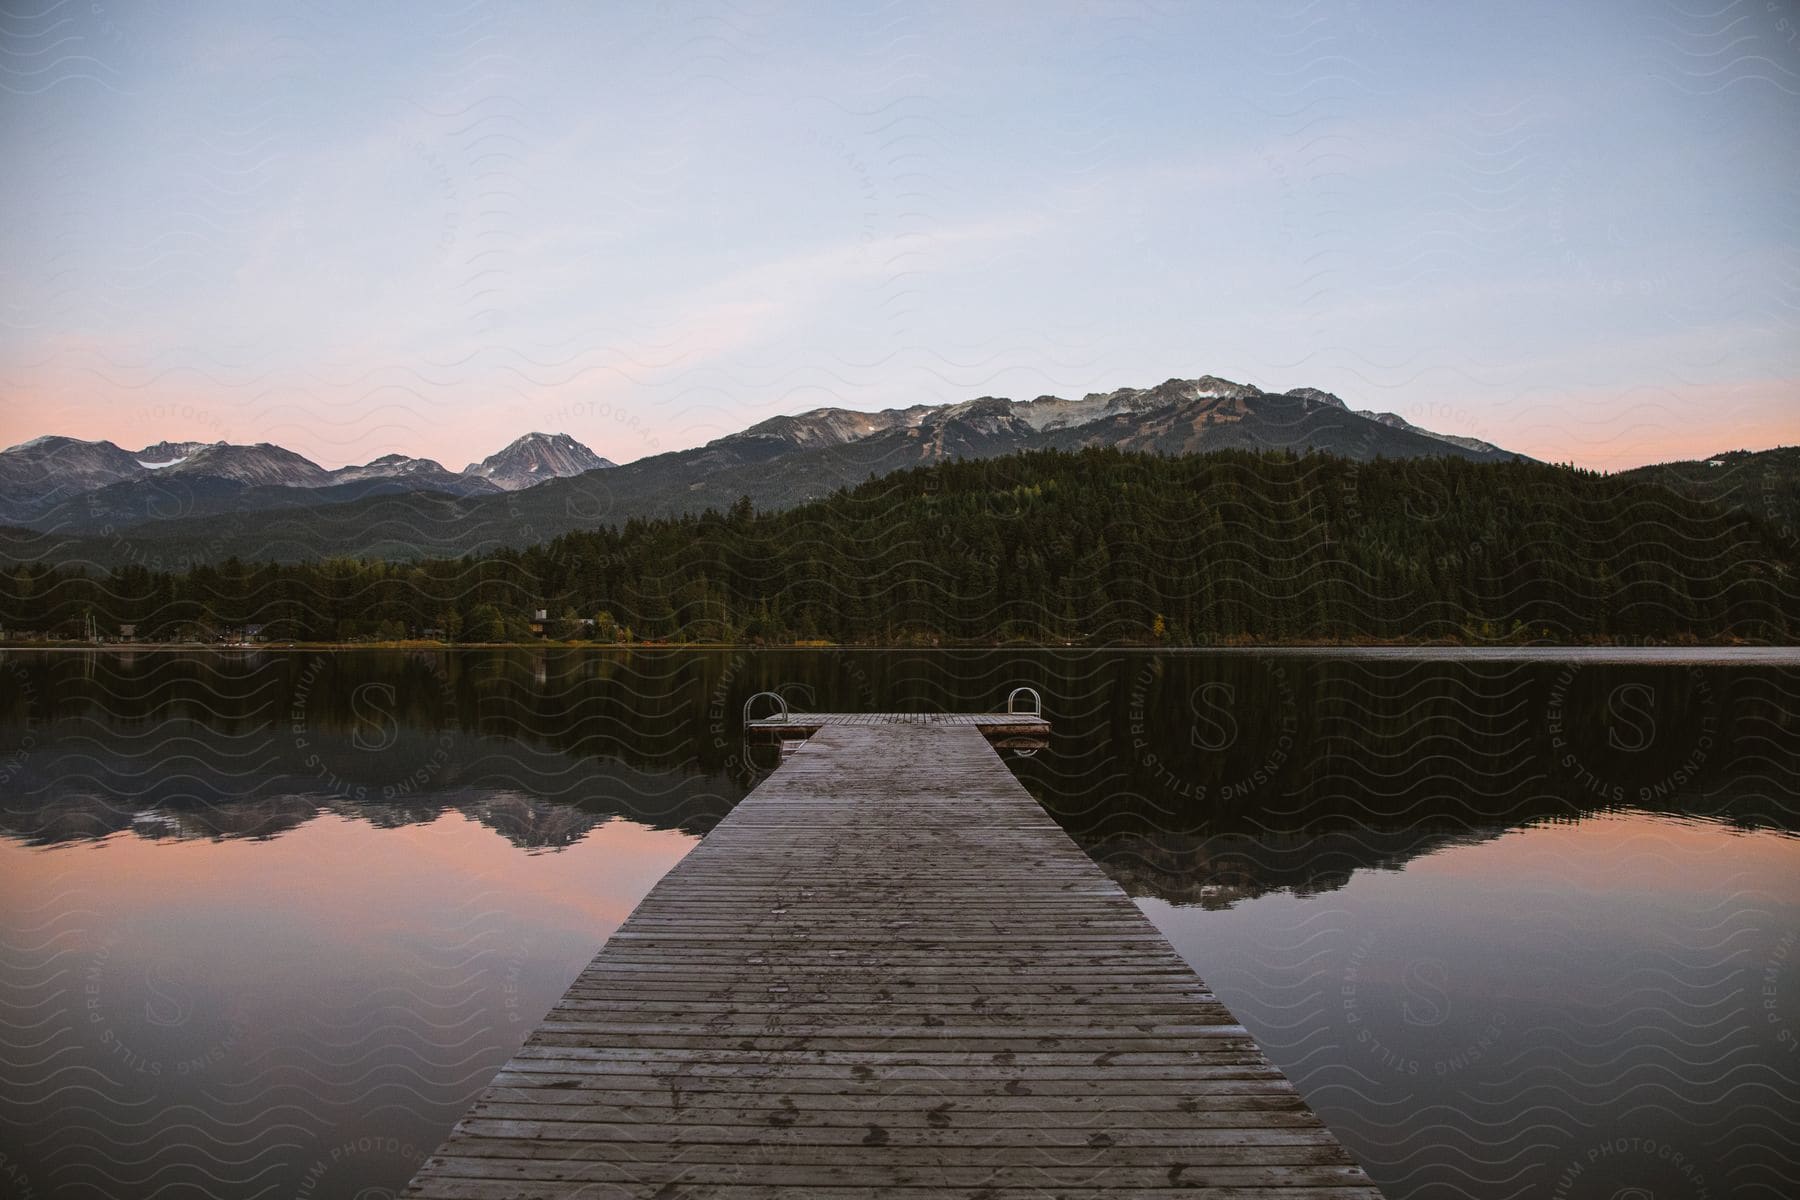 Wooden dock stretching into a lake with mountains and a forest on the other side